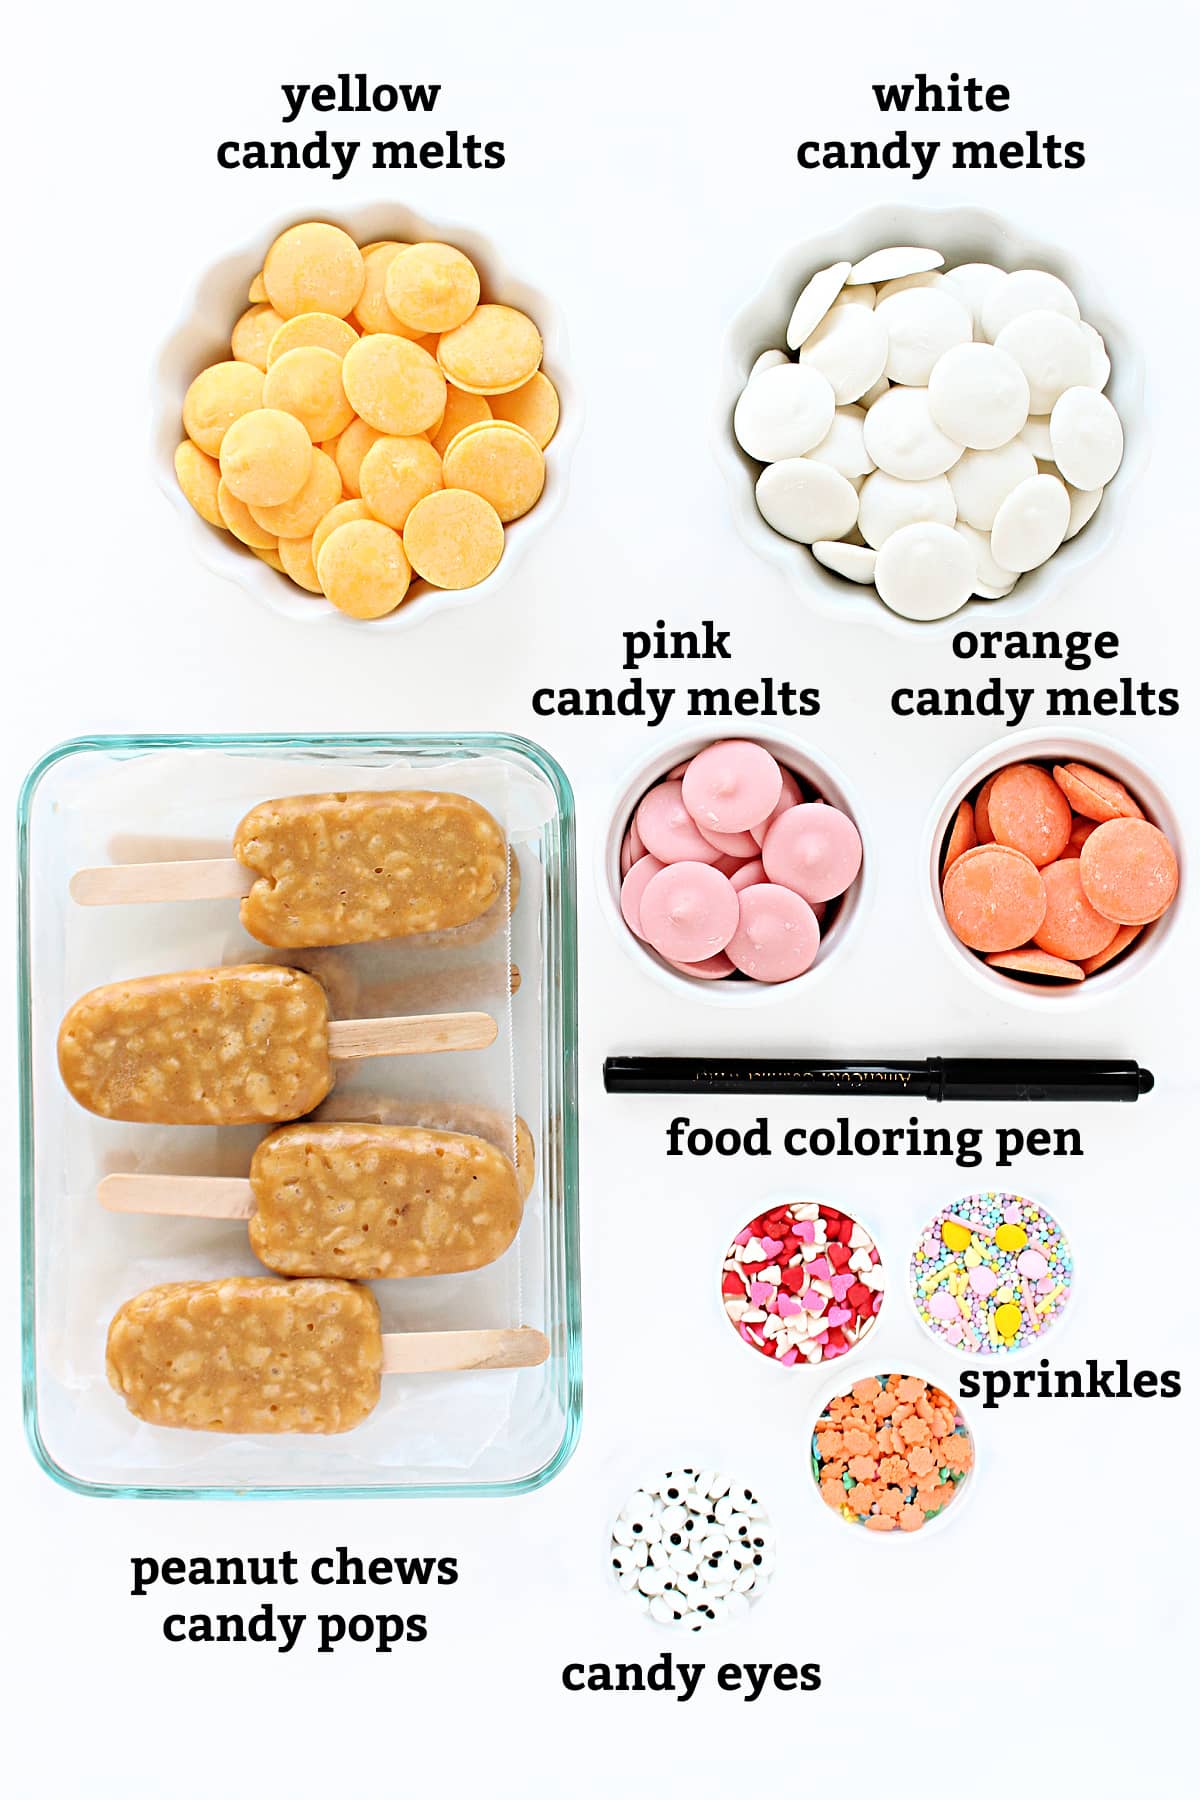 Ingredients: peanut chews pops, yellow, white, pink and orange candy melts, food coloring pen, sprinkles.